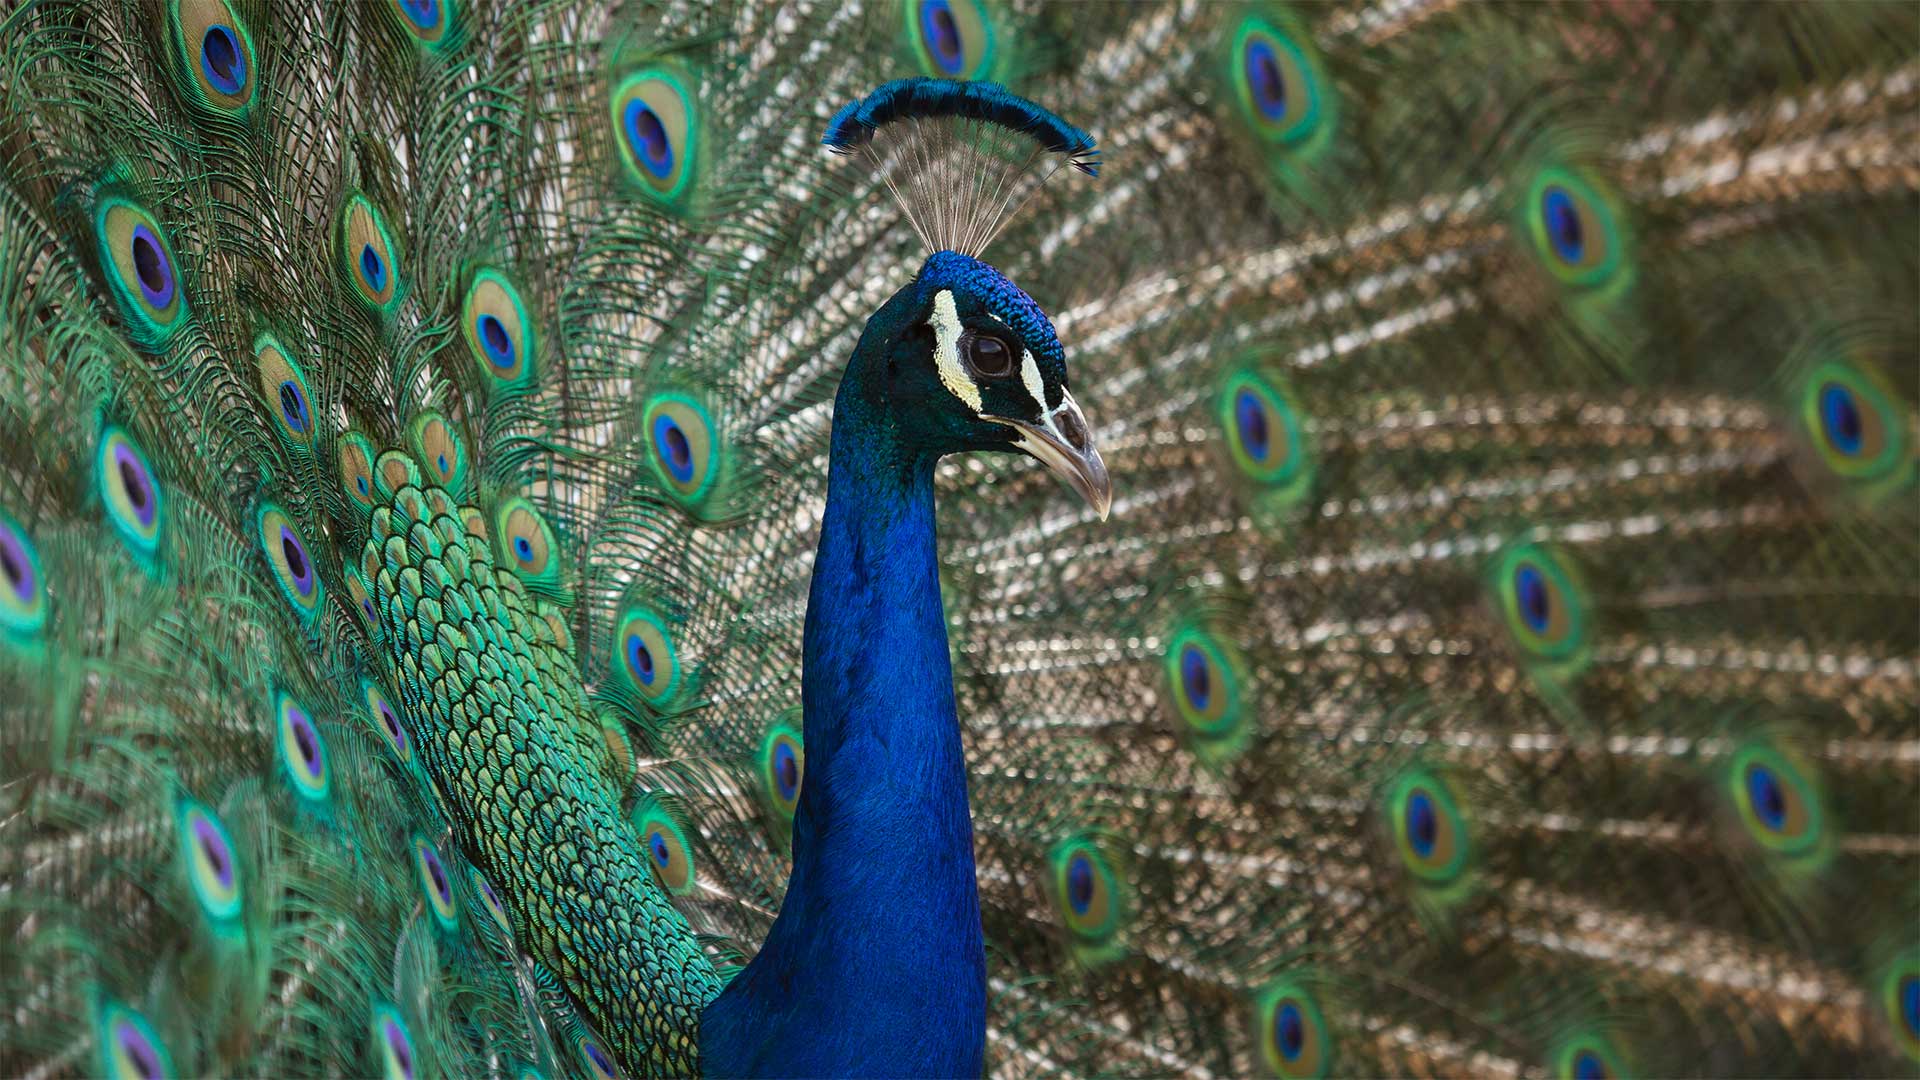 Male peacock displaying, Los Angeles. 